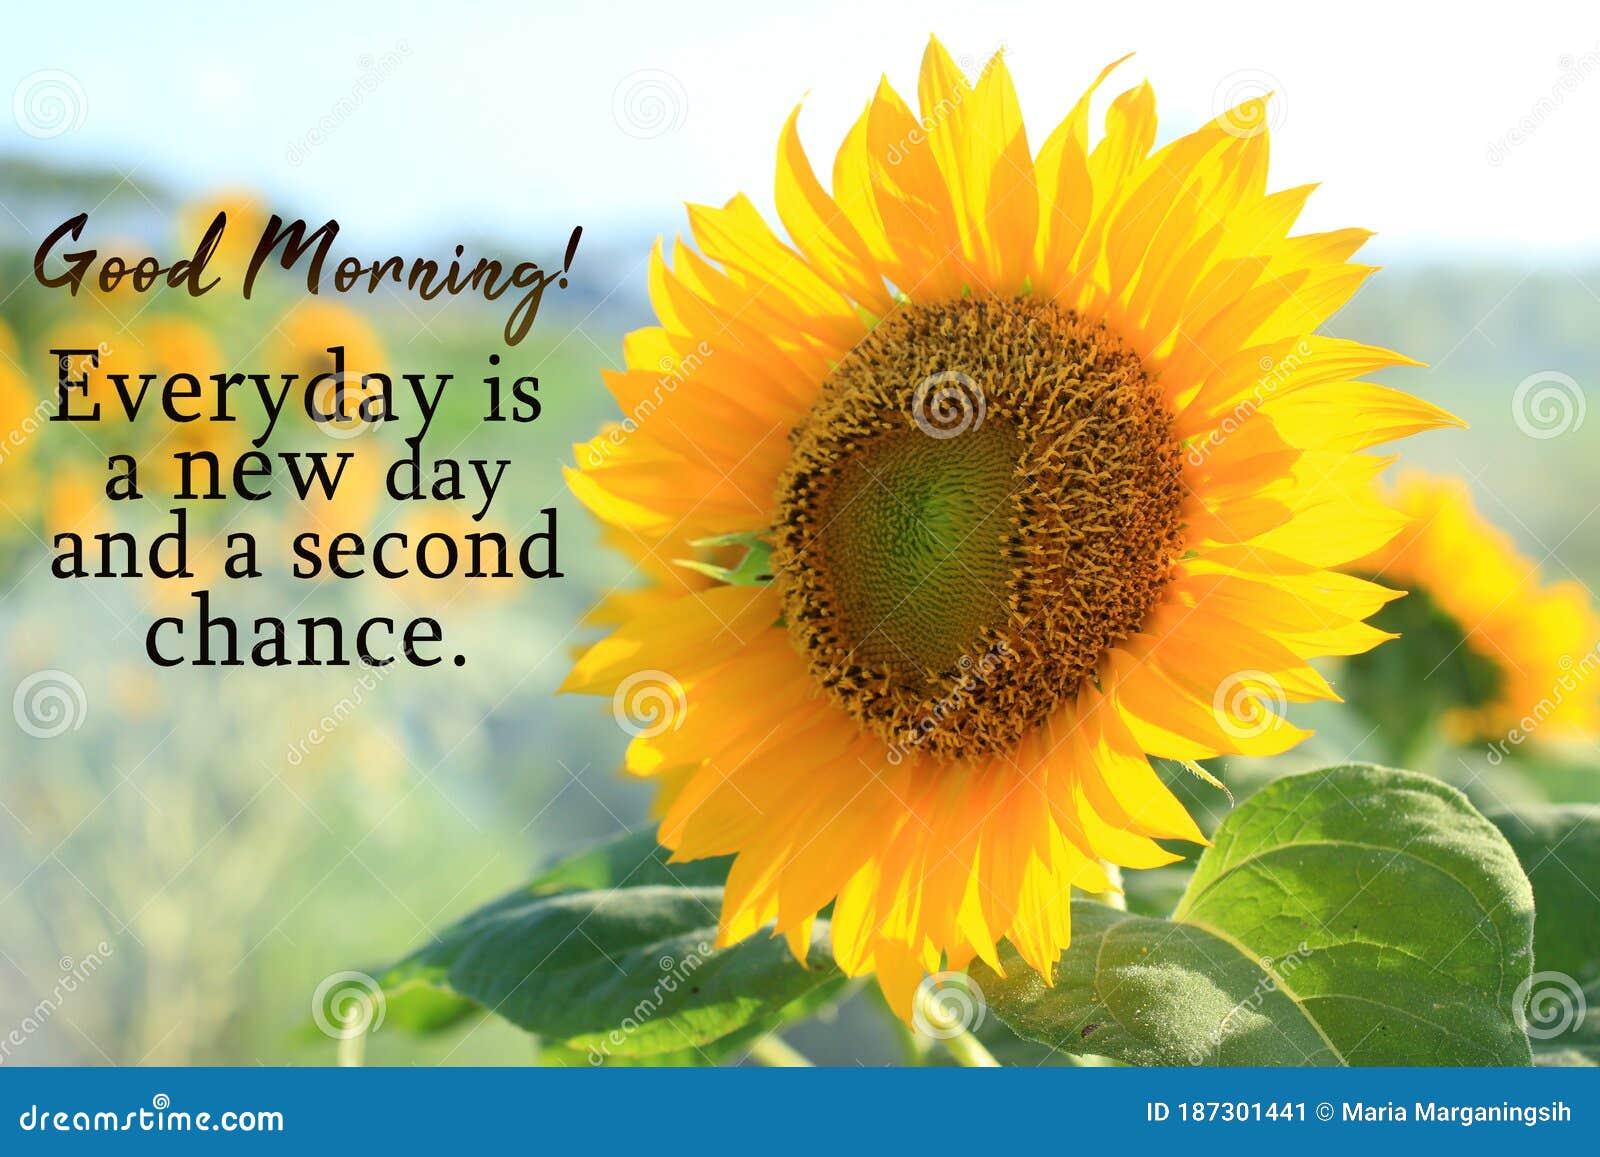 Inspirational Quote - Good Morning. Everyday is a New Day and a ...